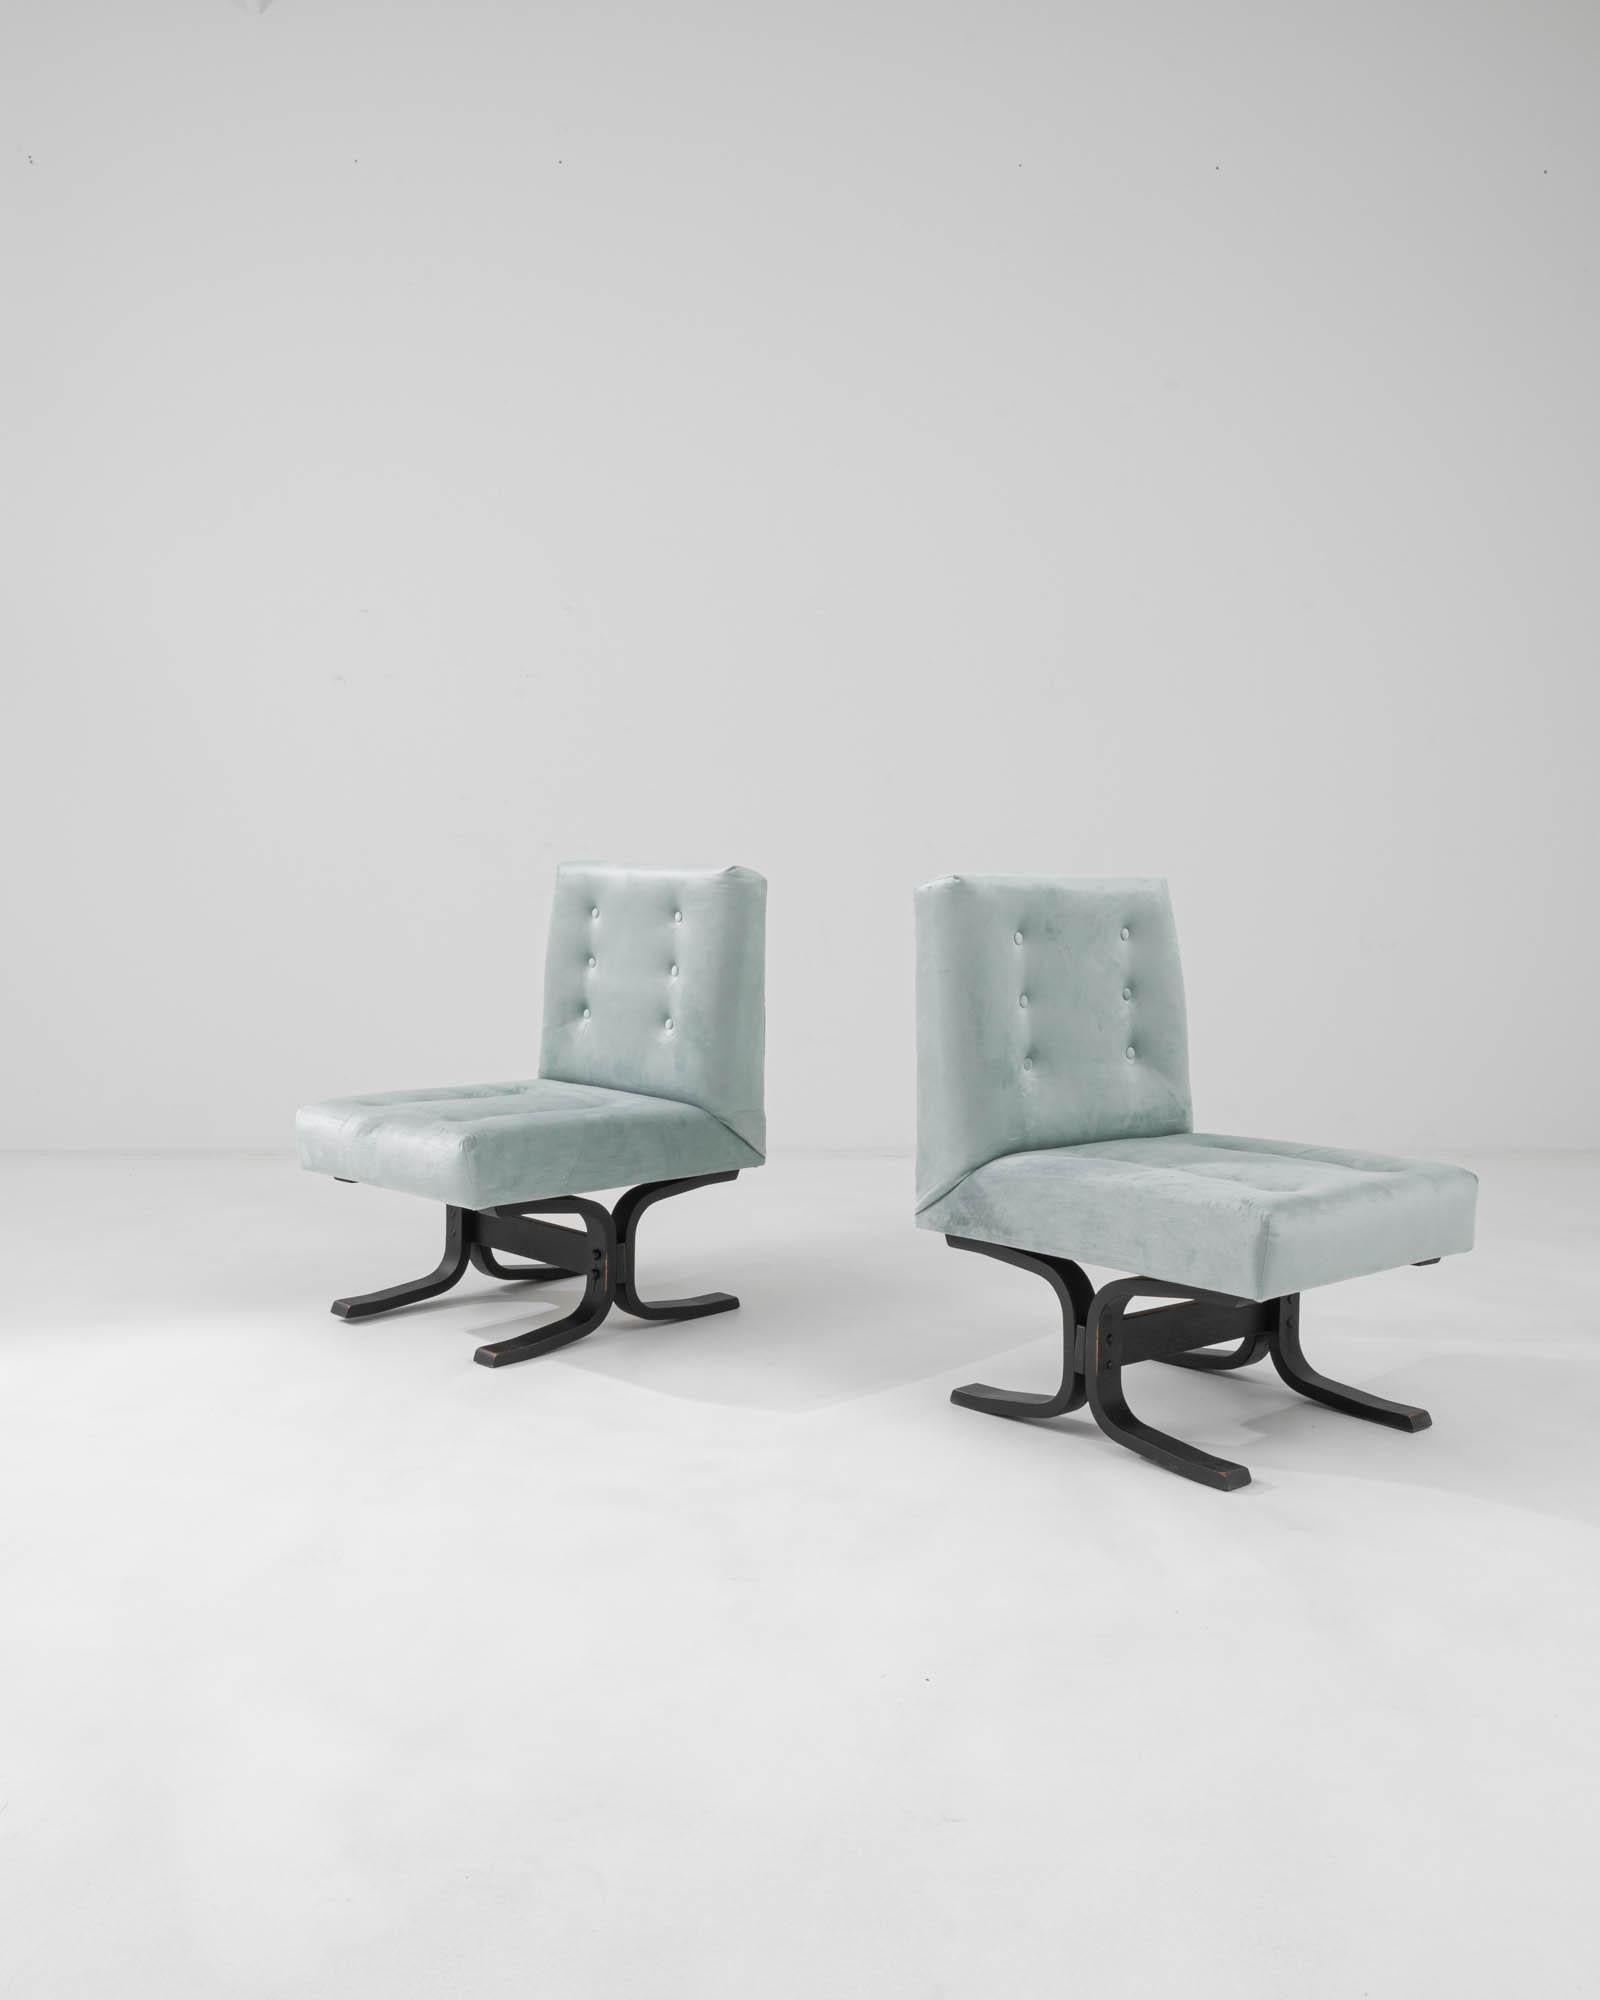 1960s Czechia Upholstered Chairs by Ludvik Volak, Set of 2 For Sale 5